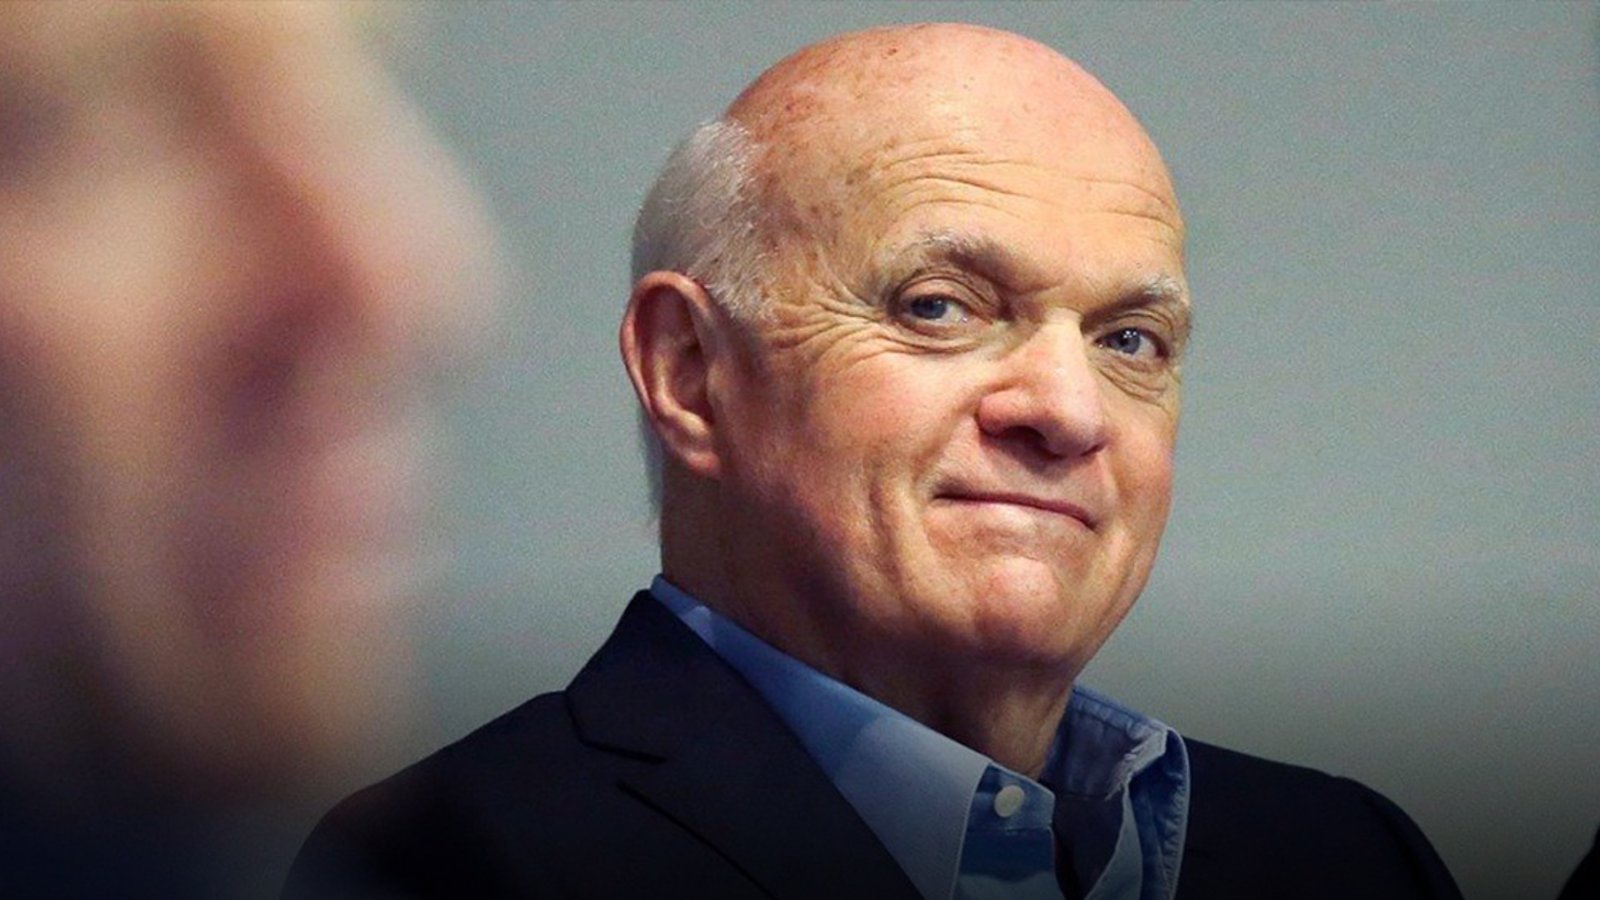 Report: Leafs’ GM Lamoriello tempers expectations for 2017-18